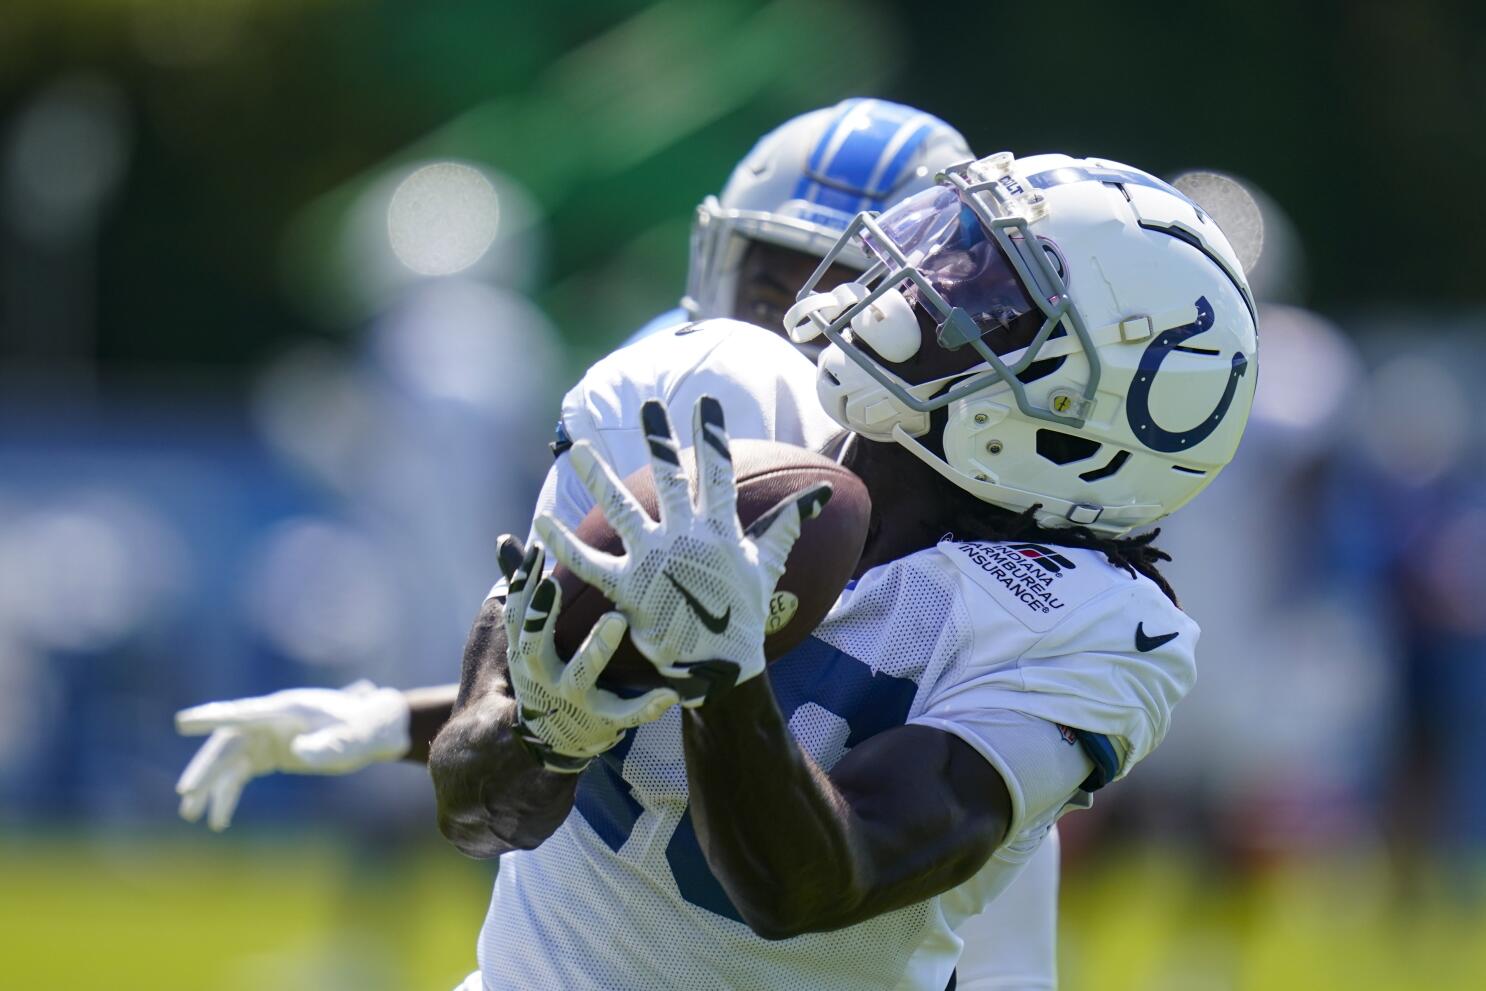 Colts rookie WR Michael Pittman shows ability to make contested catches